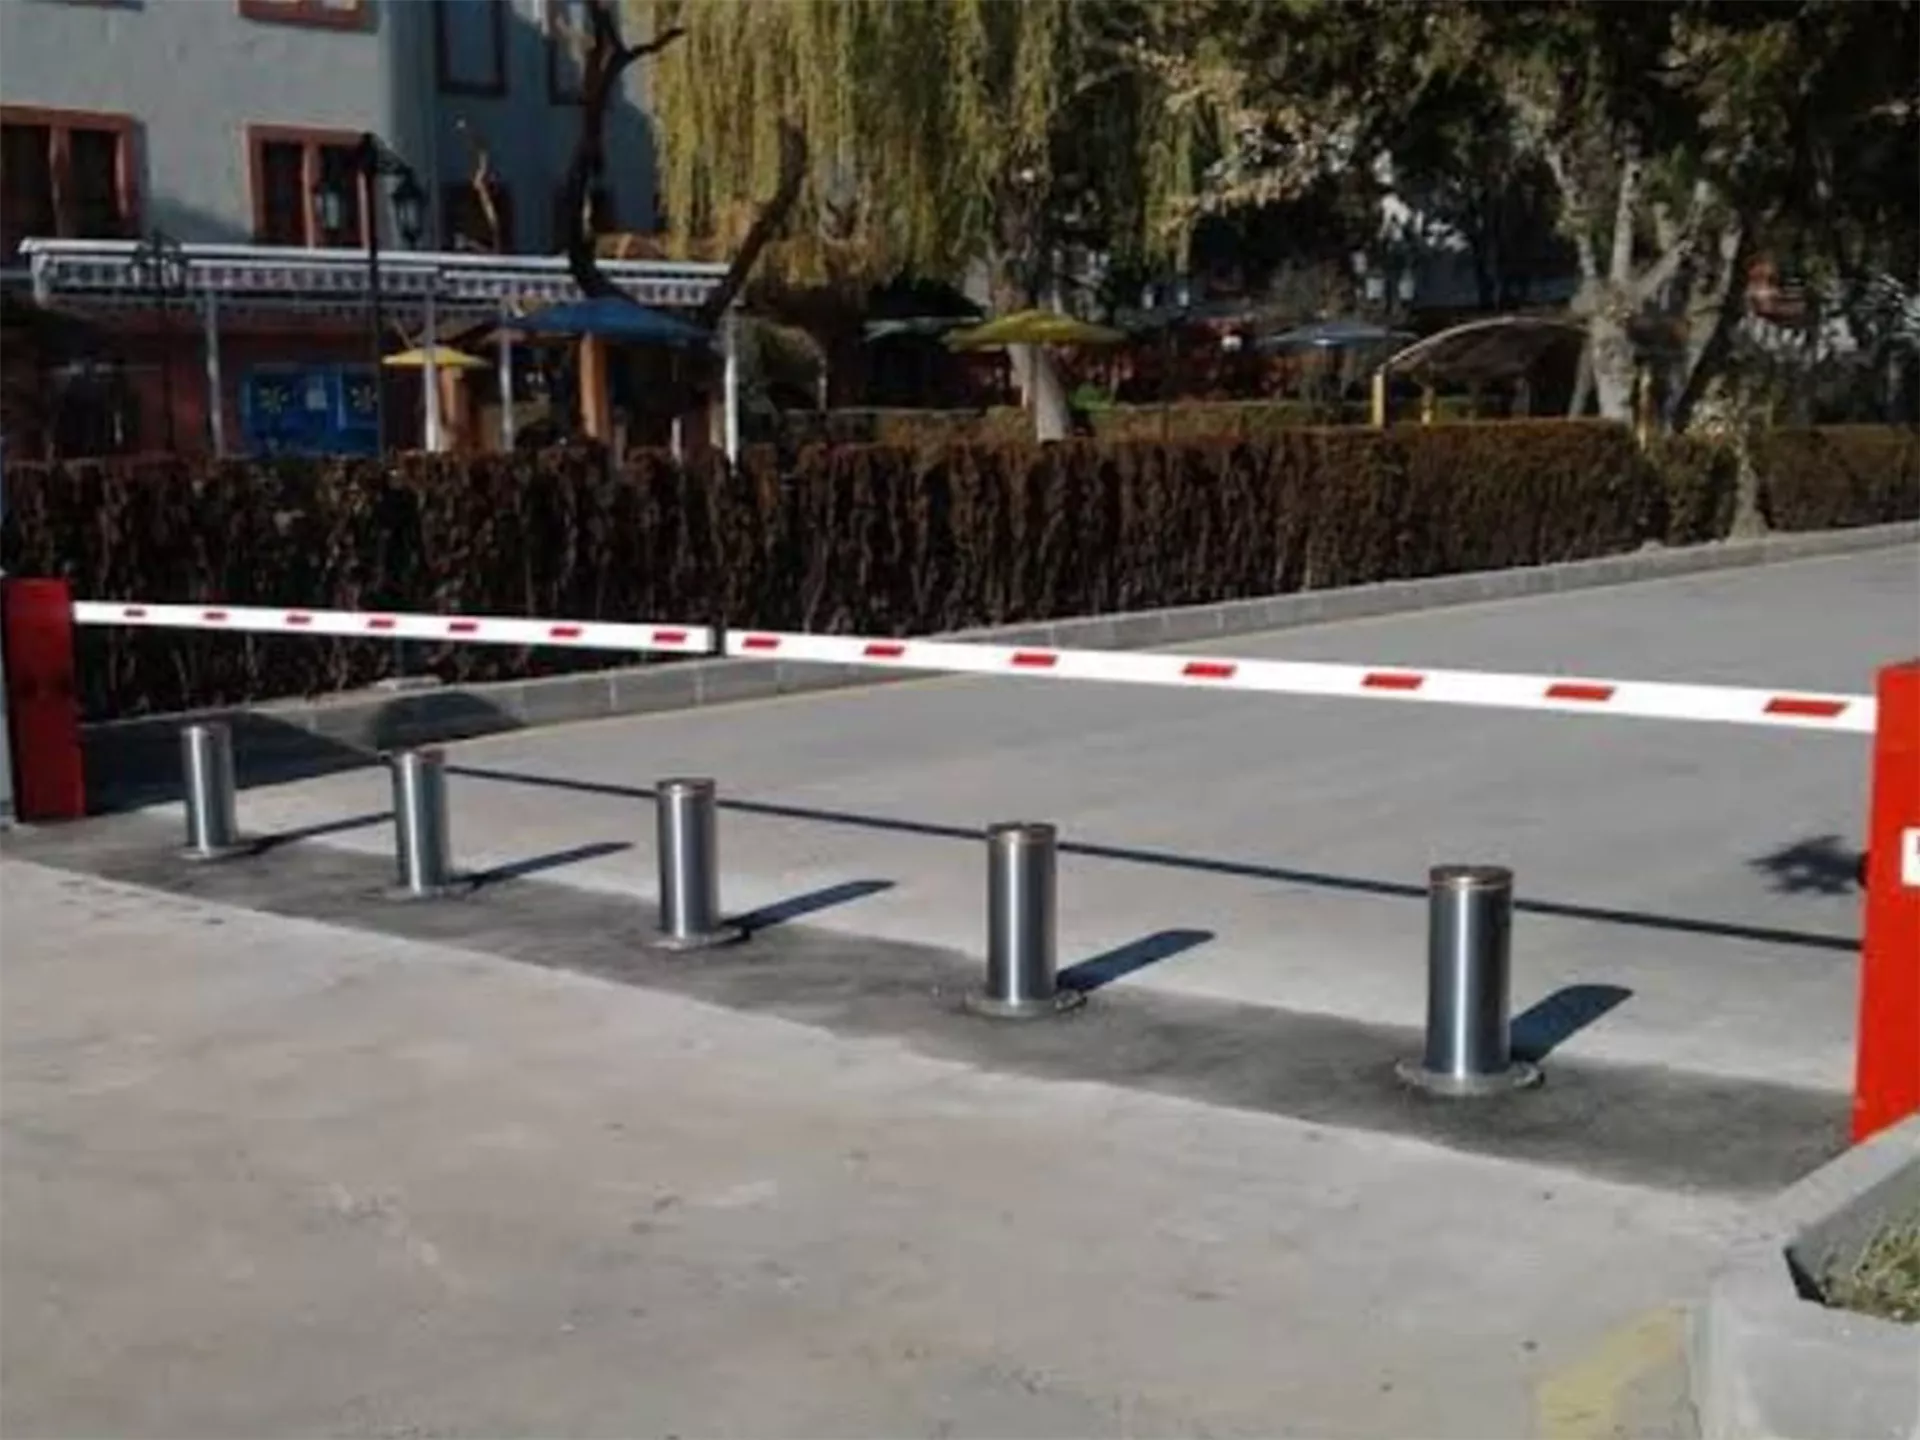 Barrier Systems